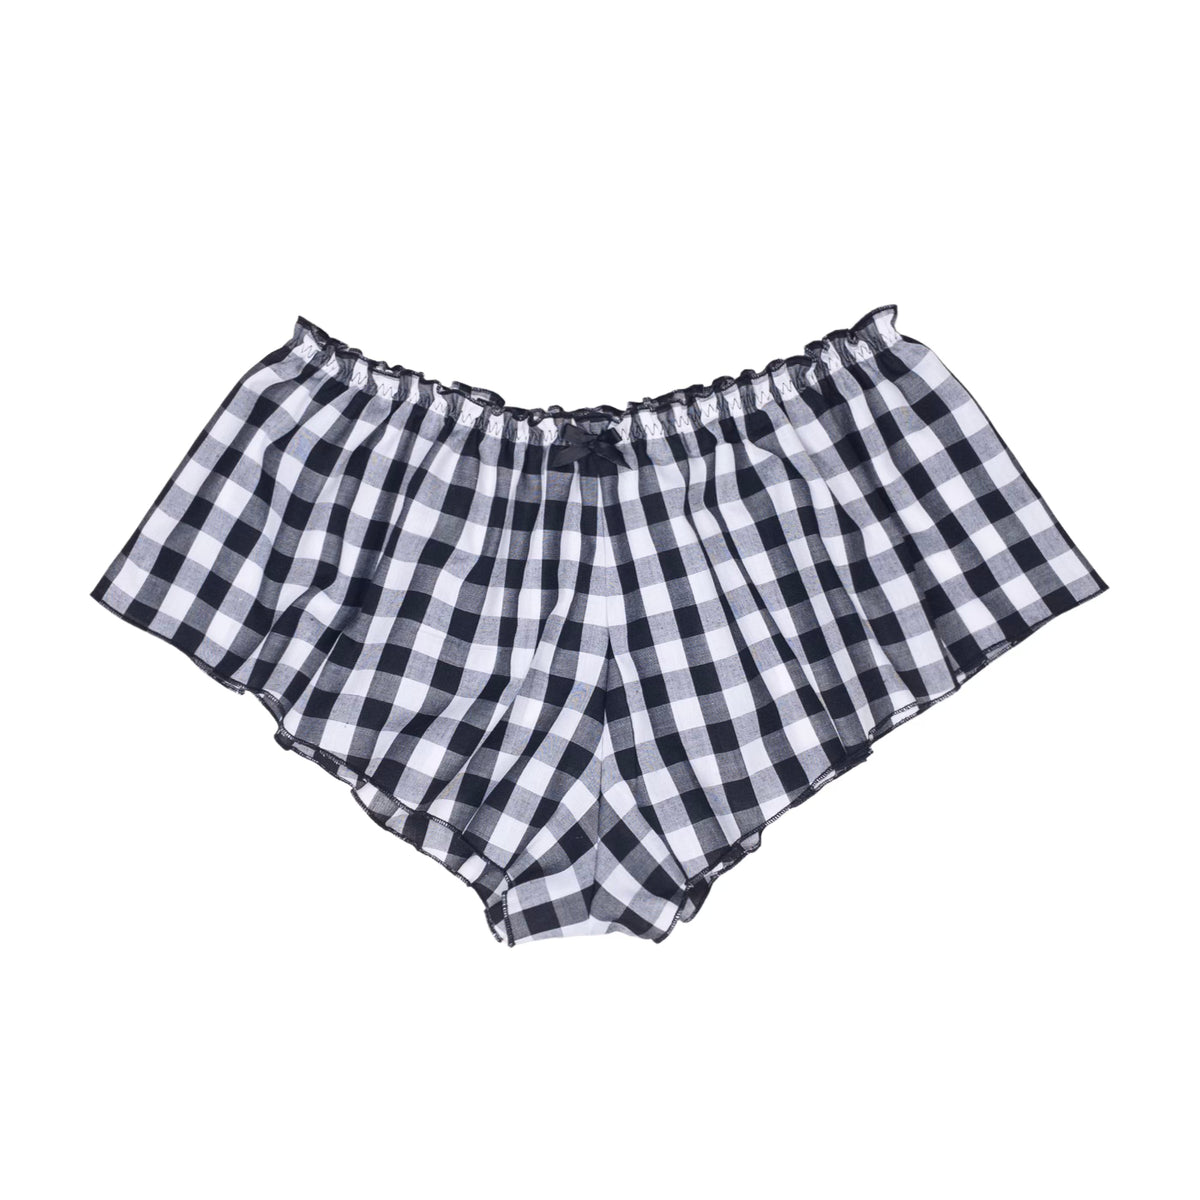 Classic French Knicker - Black Gingham